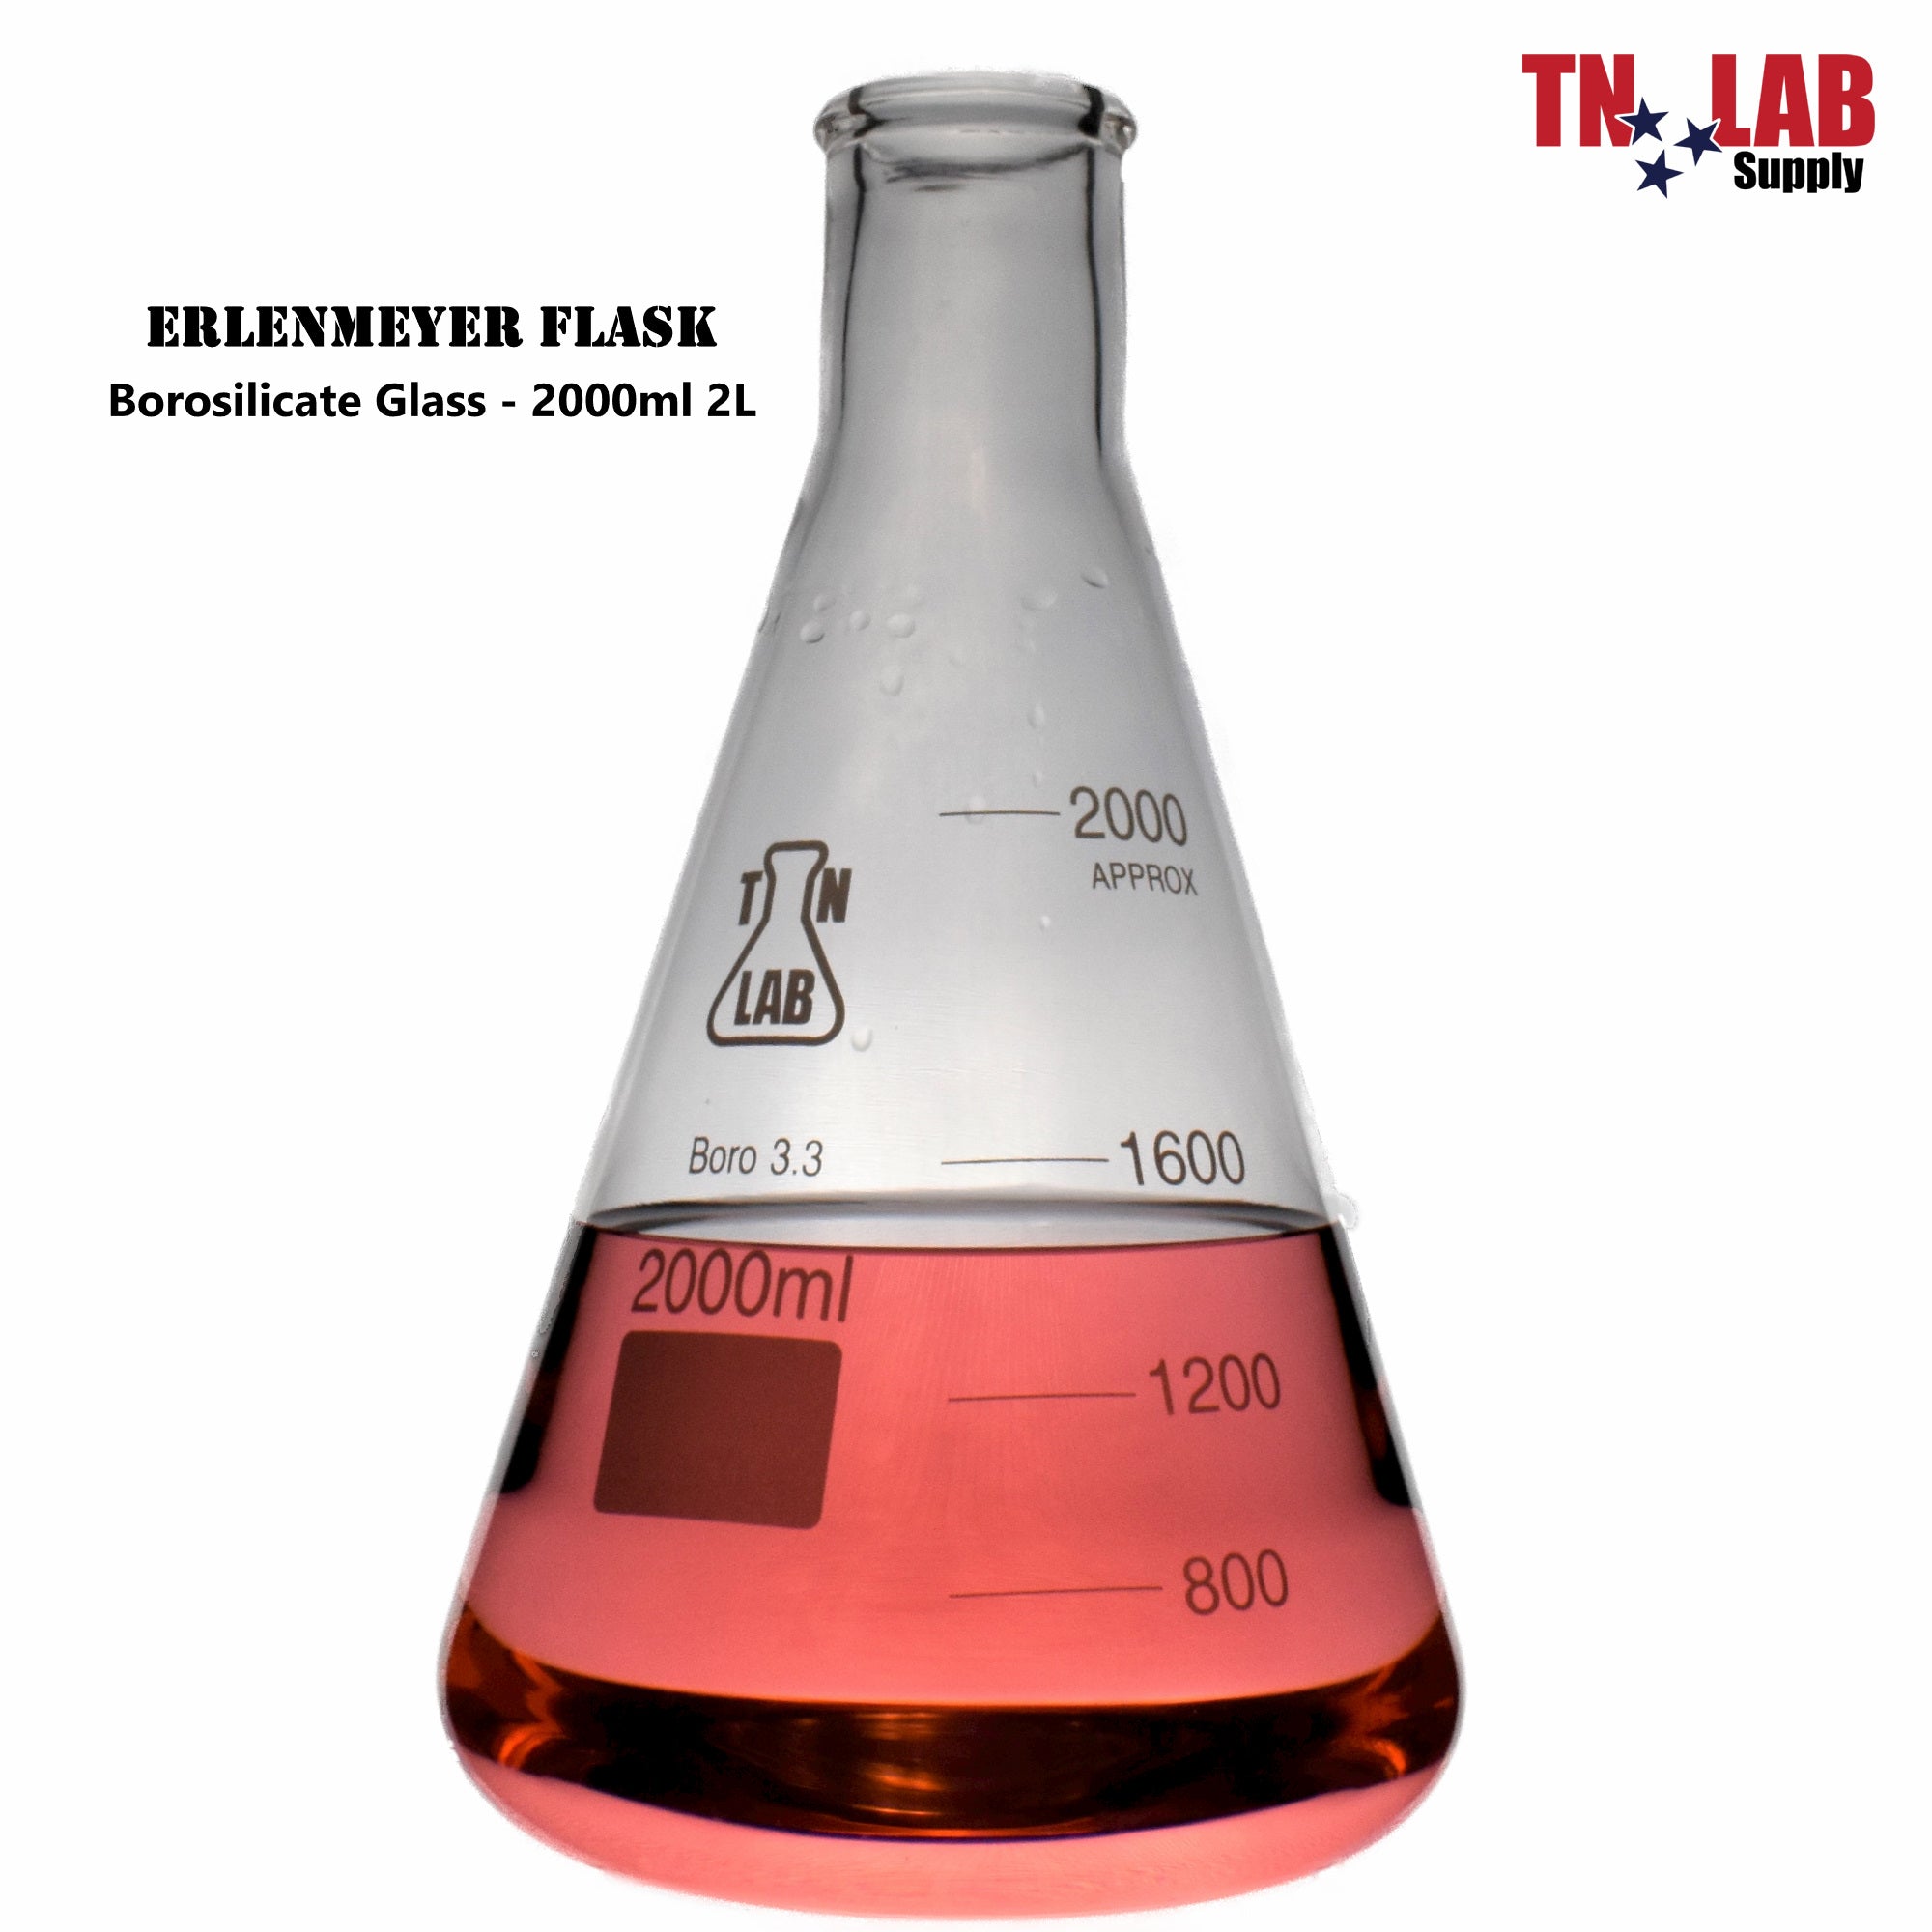 Erlenmeyer Flask Borosilicate Glass Conical Flask 2000ml 2L